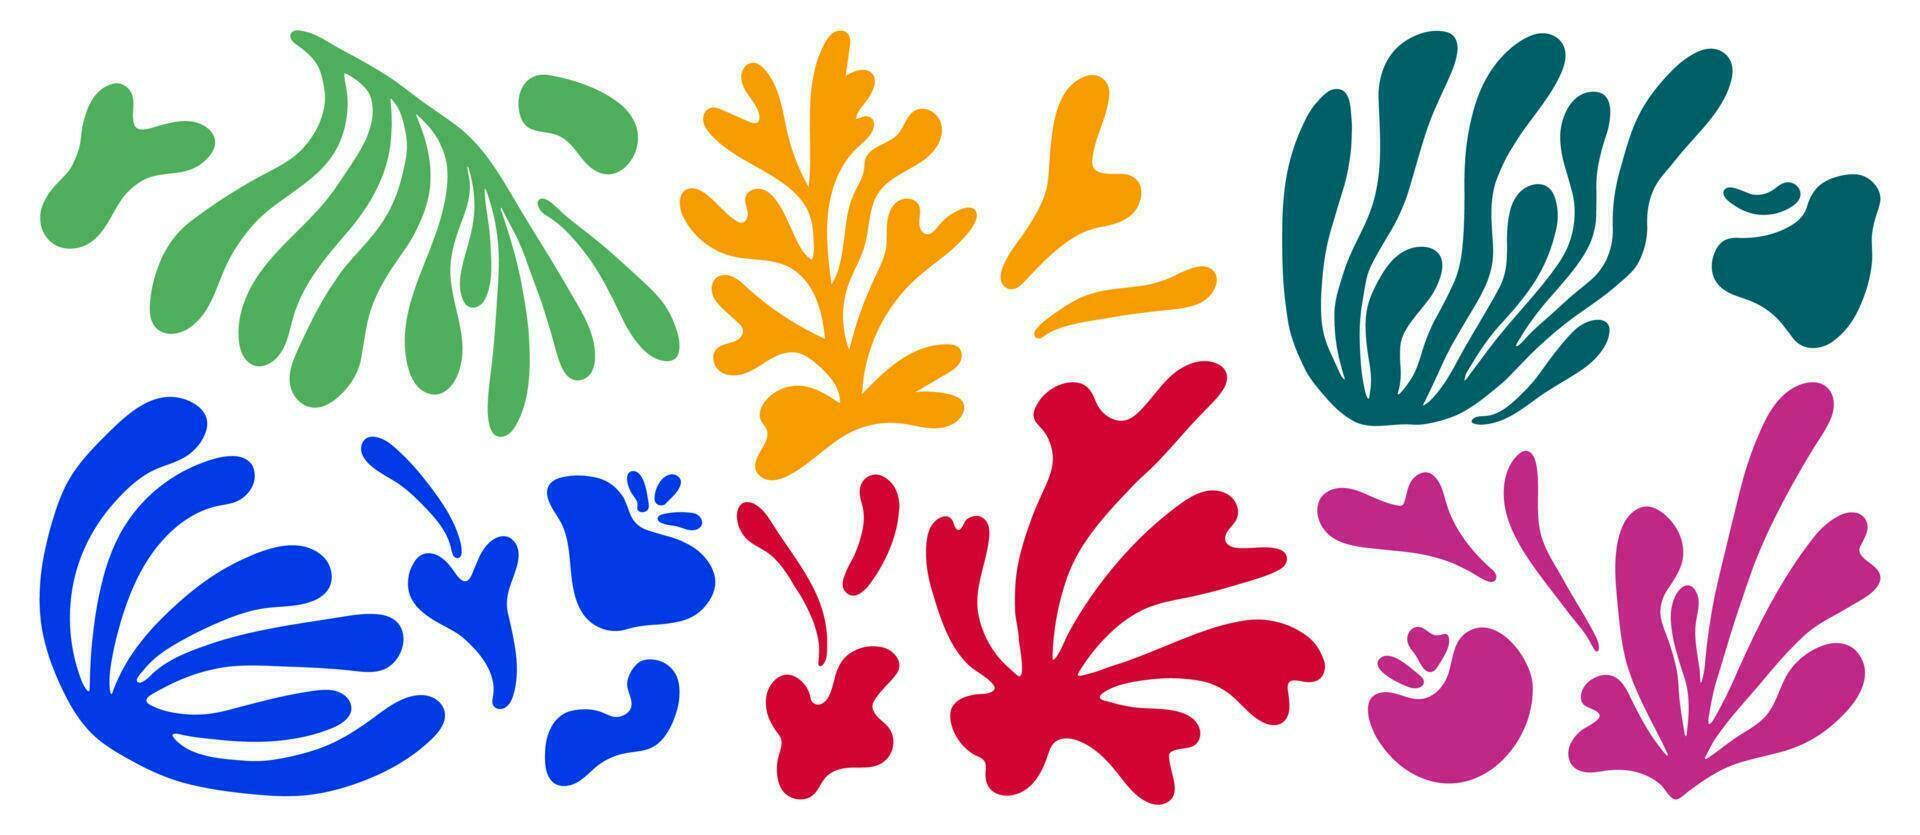 Matisse abstract floral algae shapes in trendy contemporary organic style. composition Doodle painted aestethic flower and leaf. Botanic vector illustration in vibrant color on the white background.